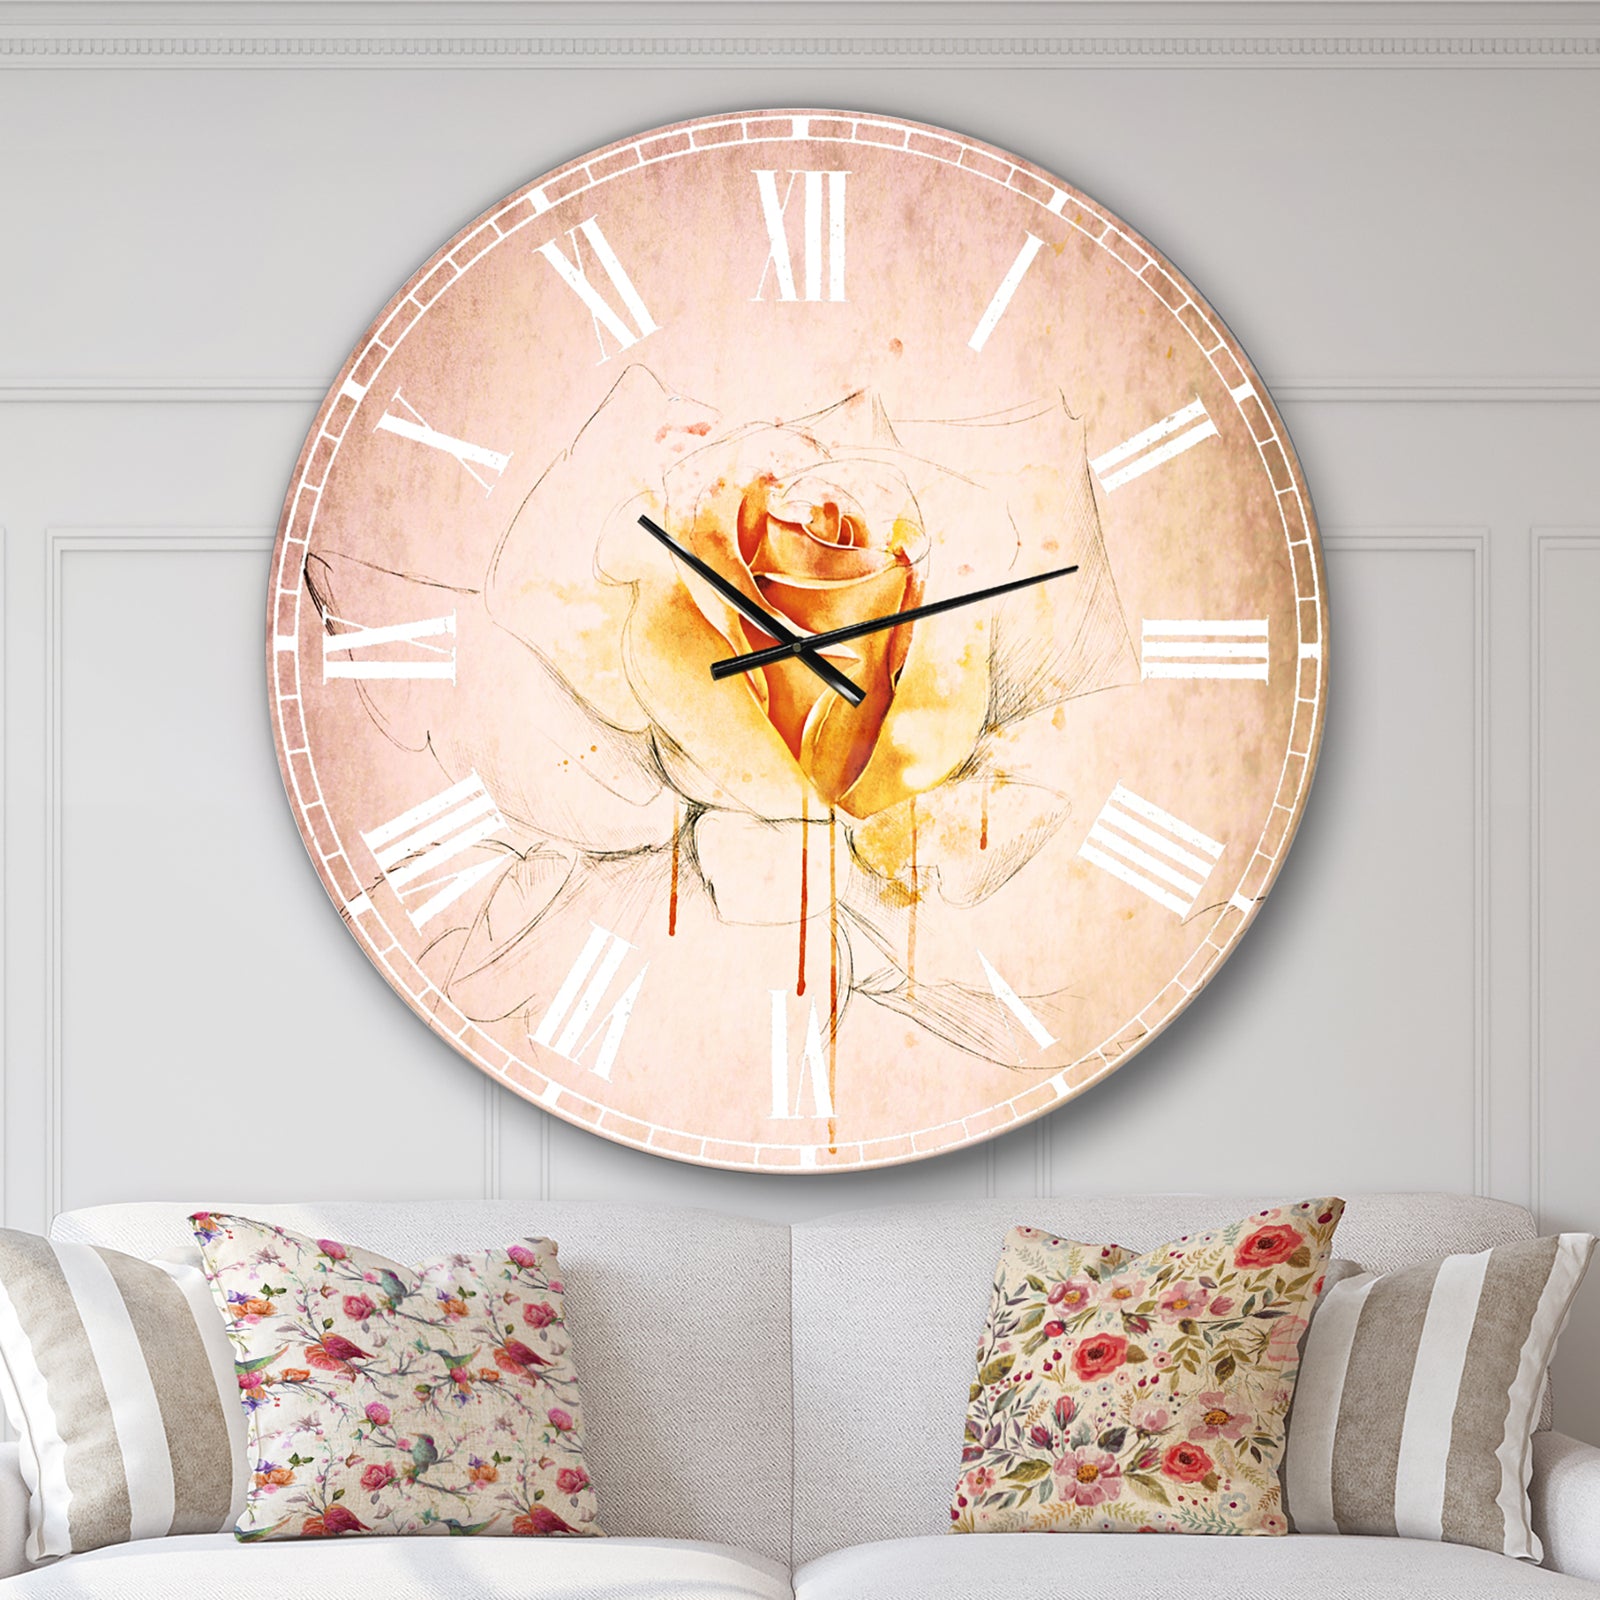 Vintage Clocks And Arrows Stock Illustration  Download Image Now  Clock  Oldfashioned Retro Style  iStock